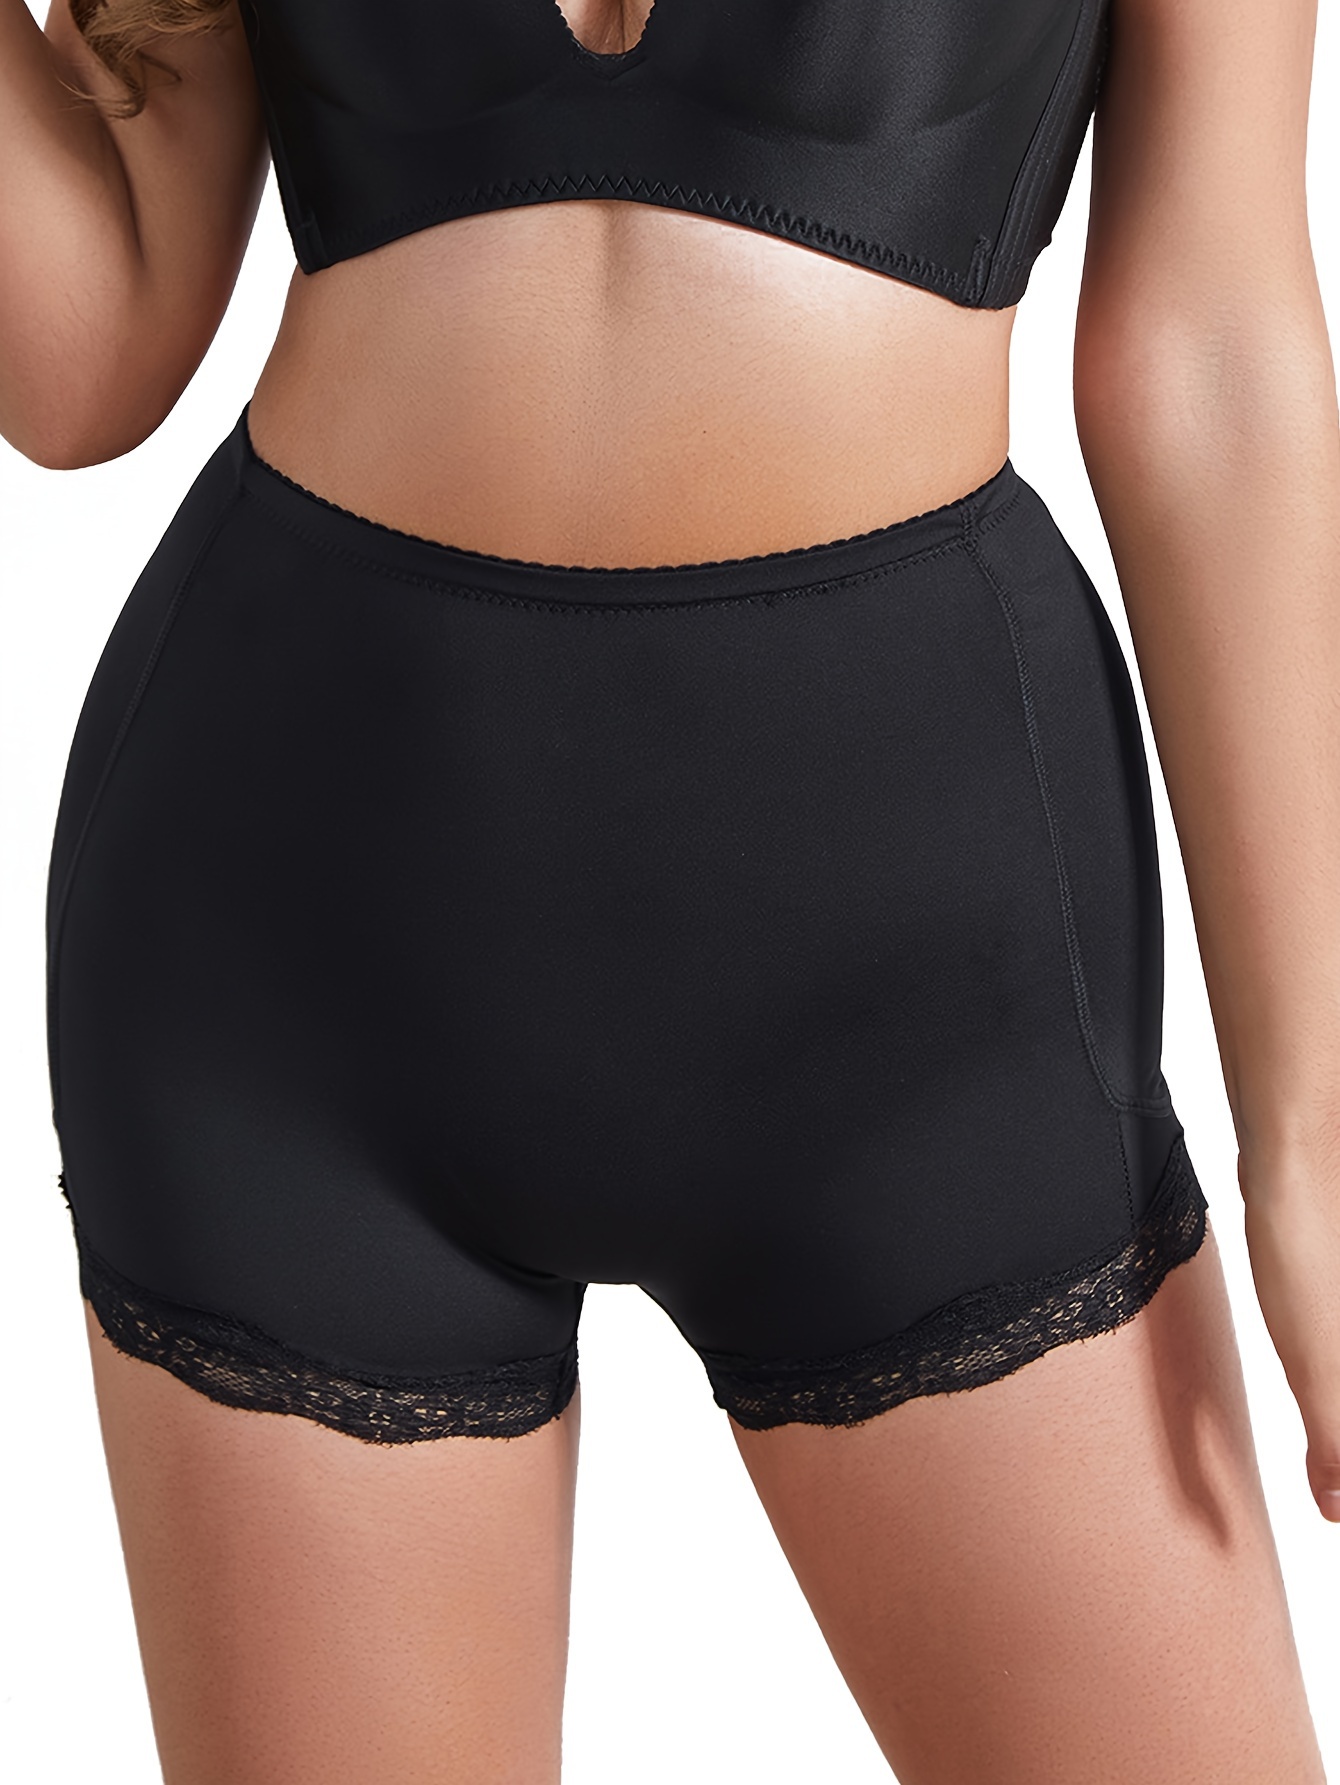 Black Bow Womens High Waist Brief With Lace, 5-Pack – Shamrock Apparel